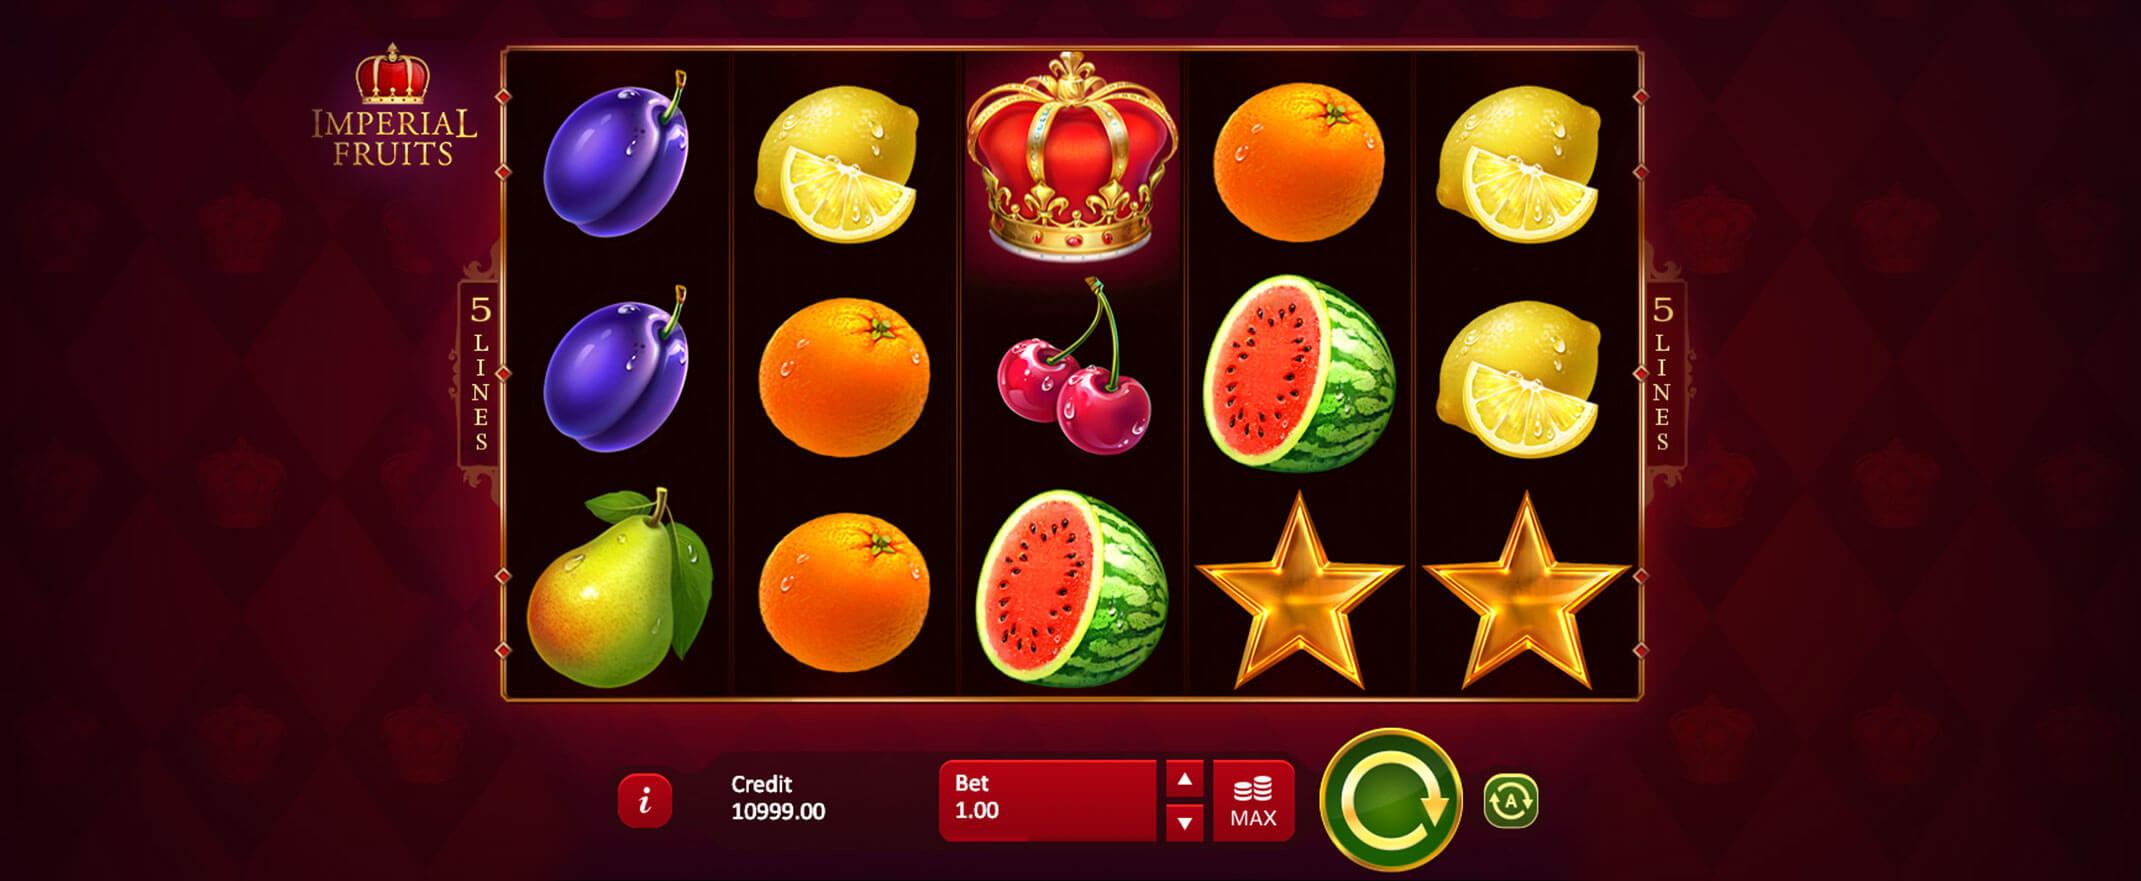 Imperial Fruits 5 lines slot